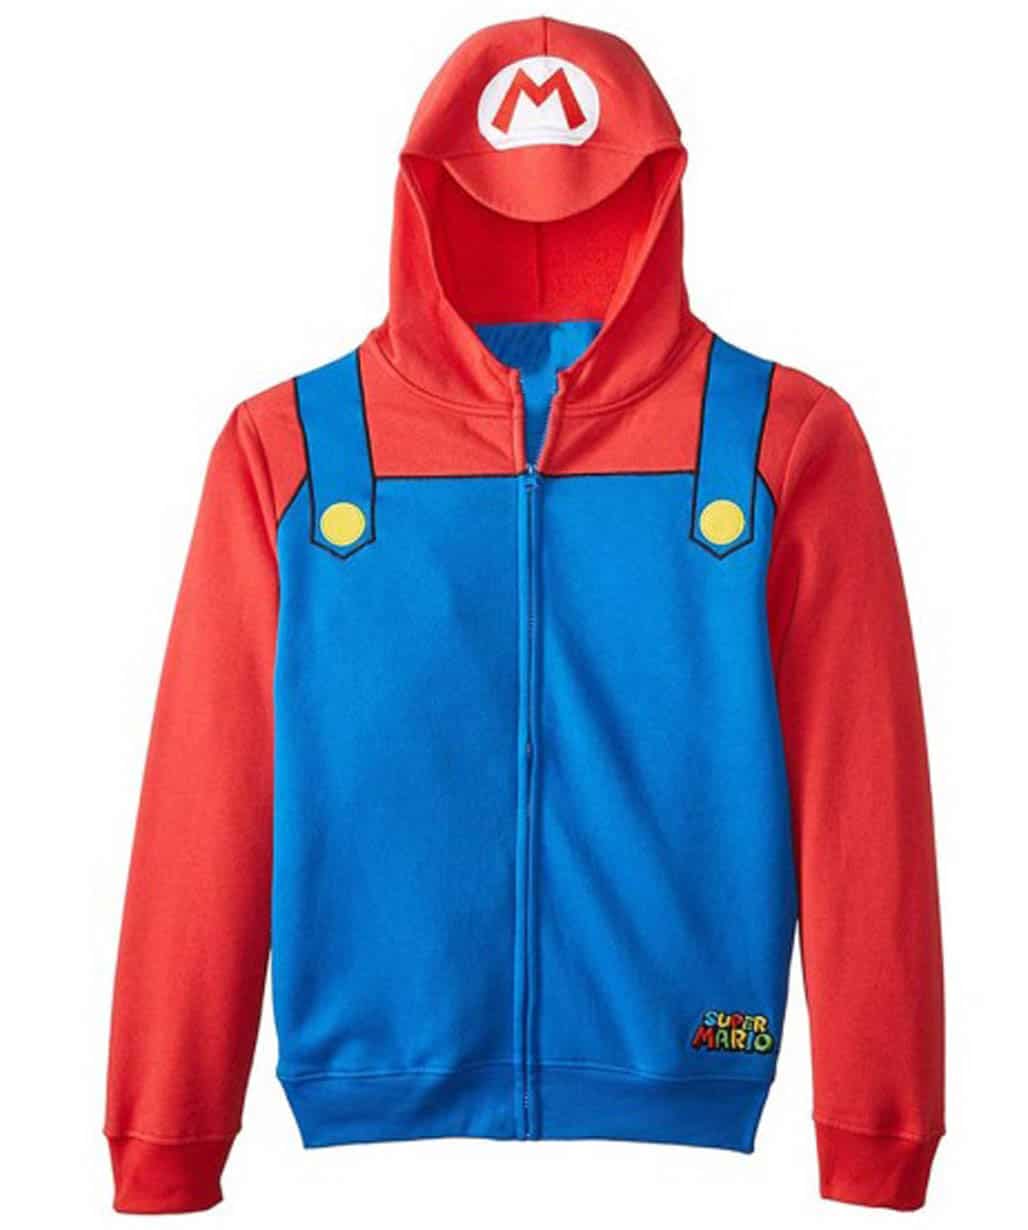 Super-Mario-Bros-Outfit-Red-and-Blue-Hoodie